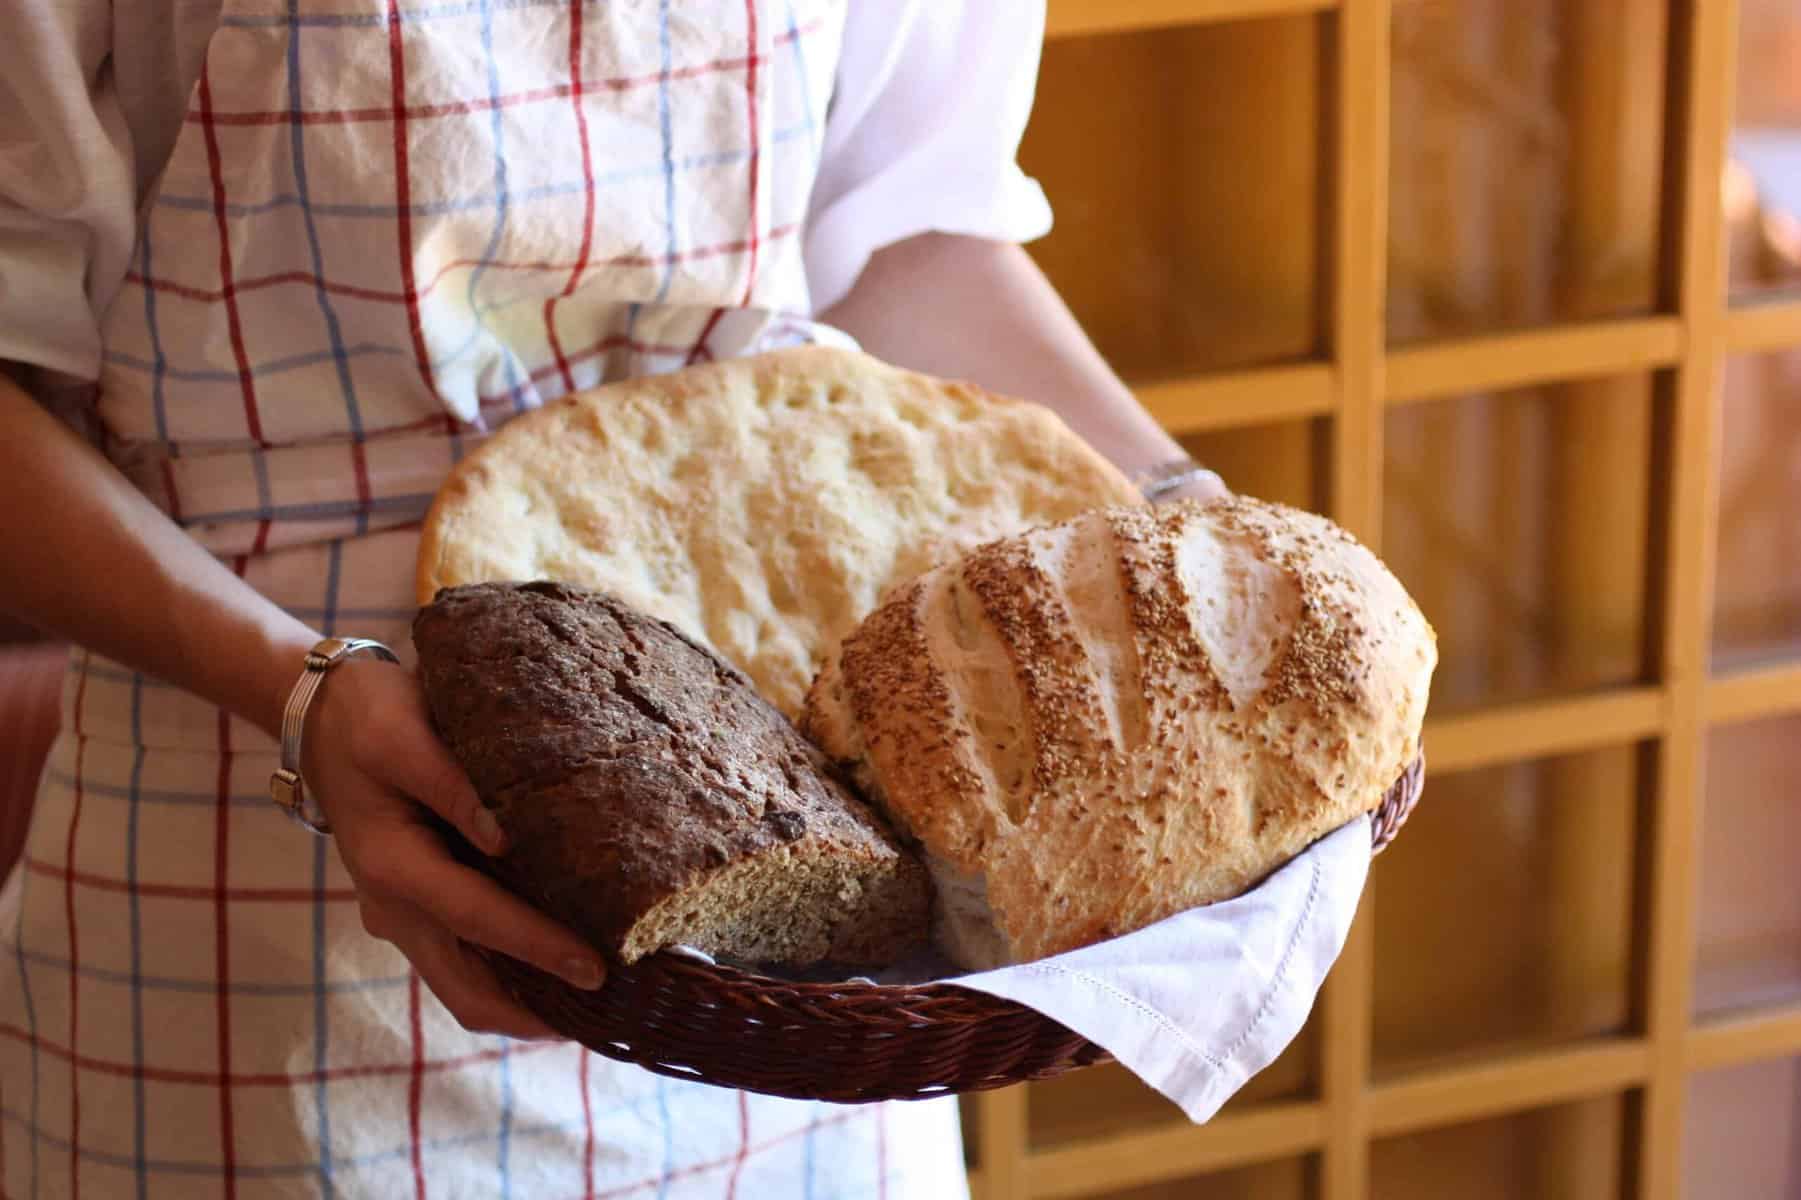  The airy texture of the bread pairs perfectly with a hearty bowl of soup.